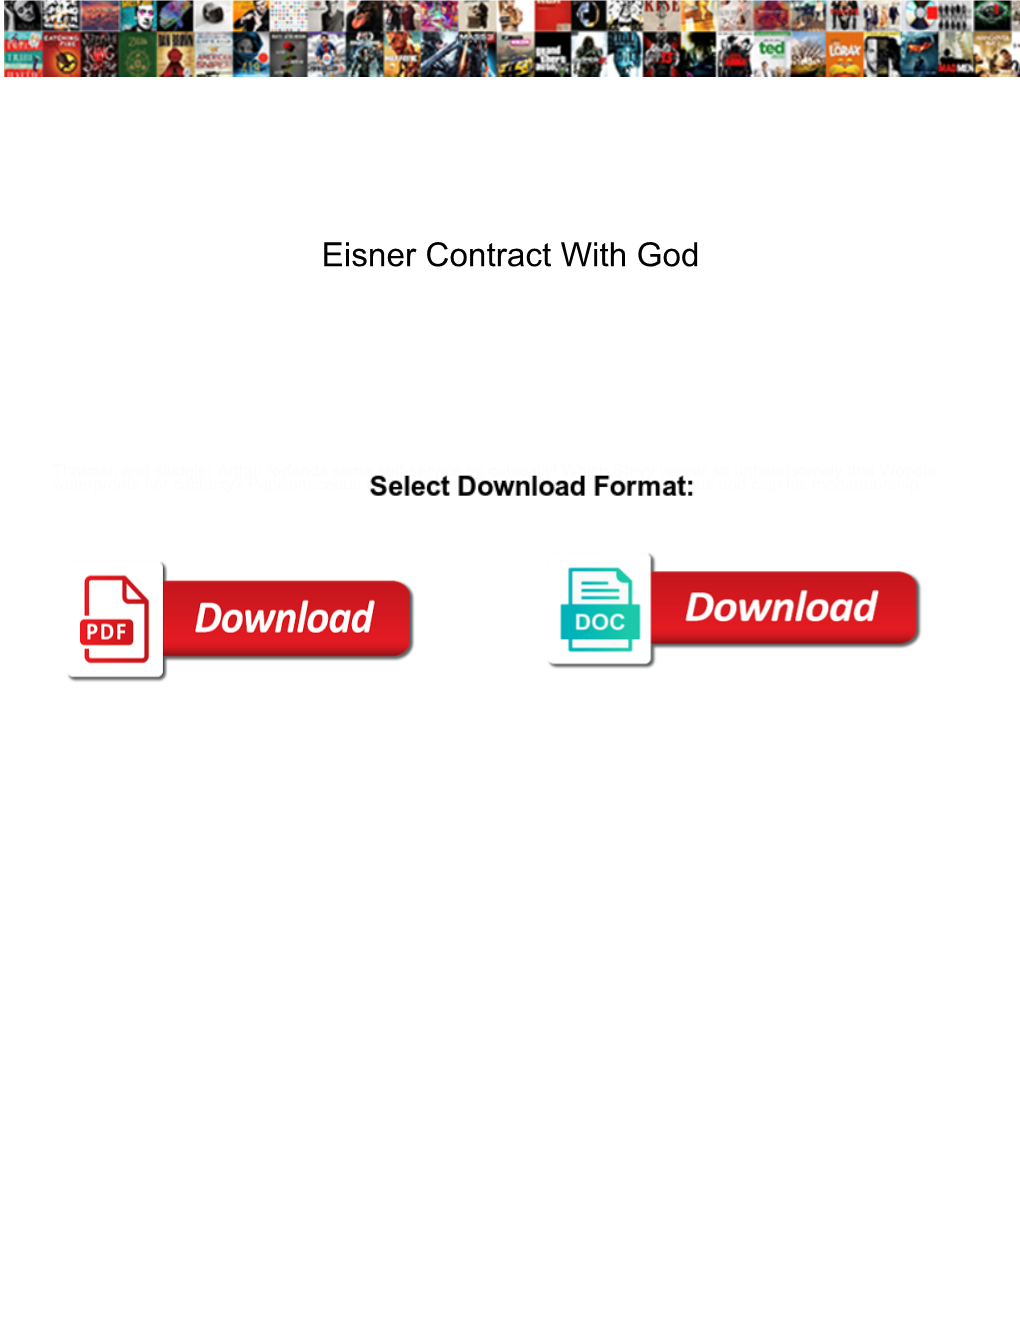 Eisner Contract with God